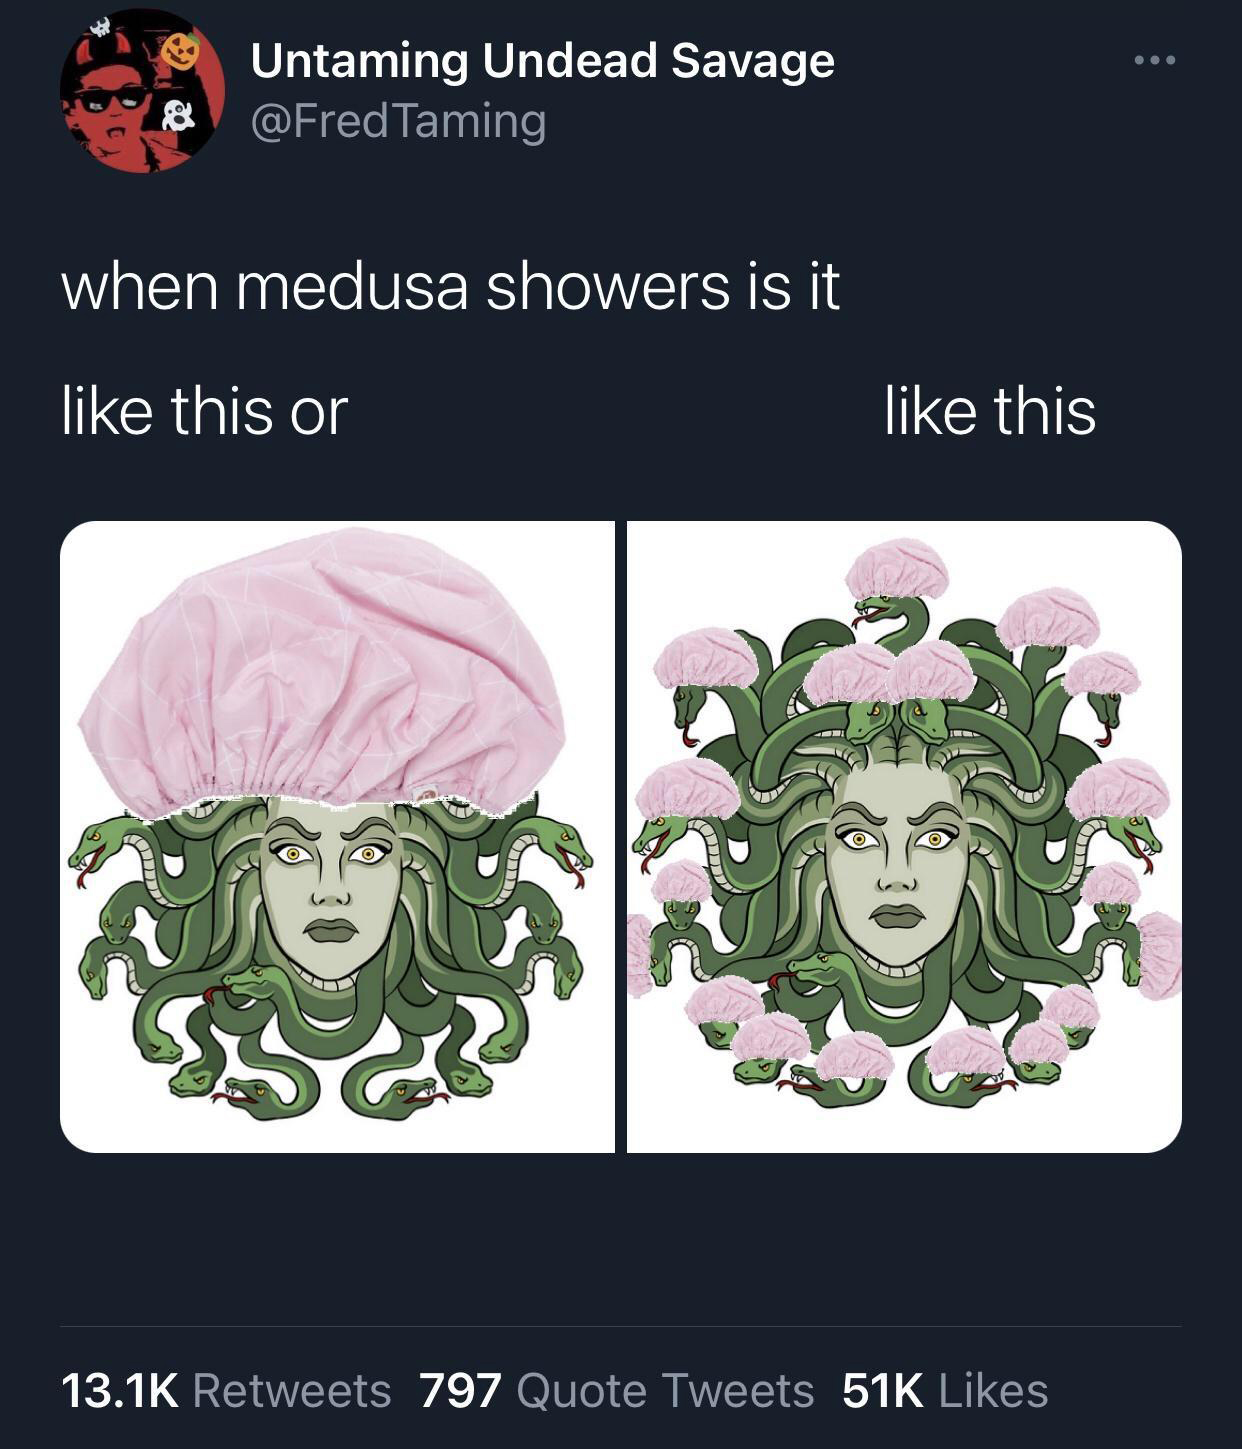 funniest tweets of the week  - medusa showers - Untaming Undead Savage & Taming when medusa showers is it this or $562 this R 797 Quote Tweets 51K